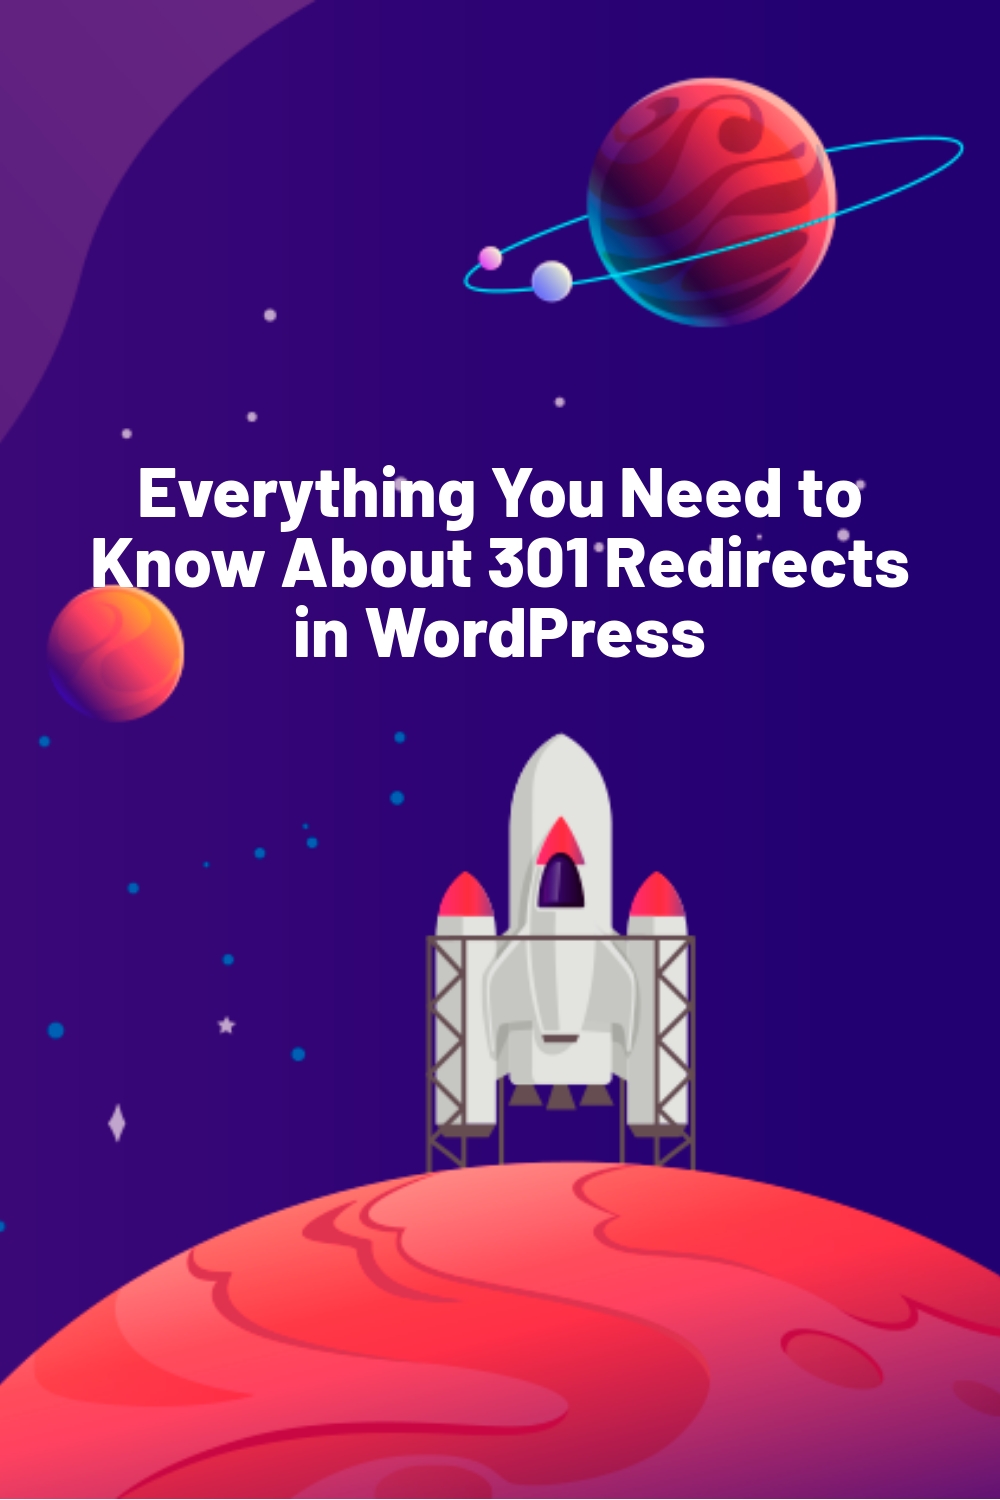 Everything You Need to Know About 301 Redirects in WordPress